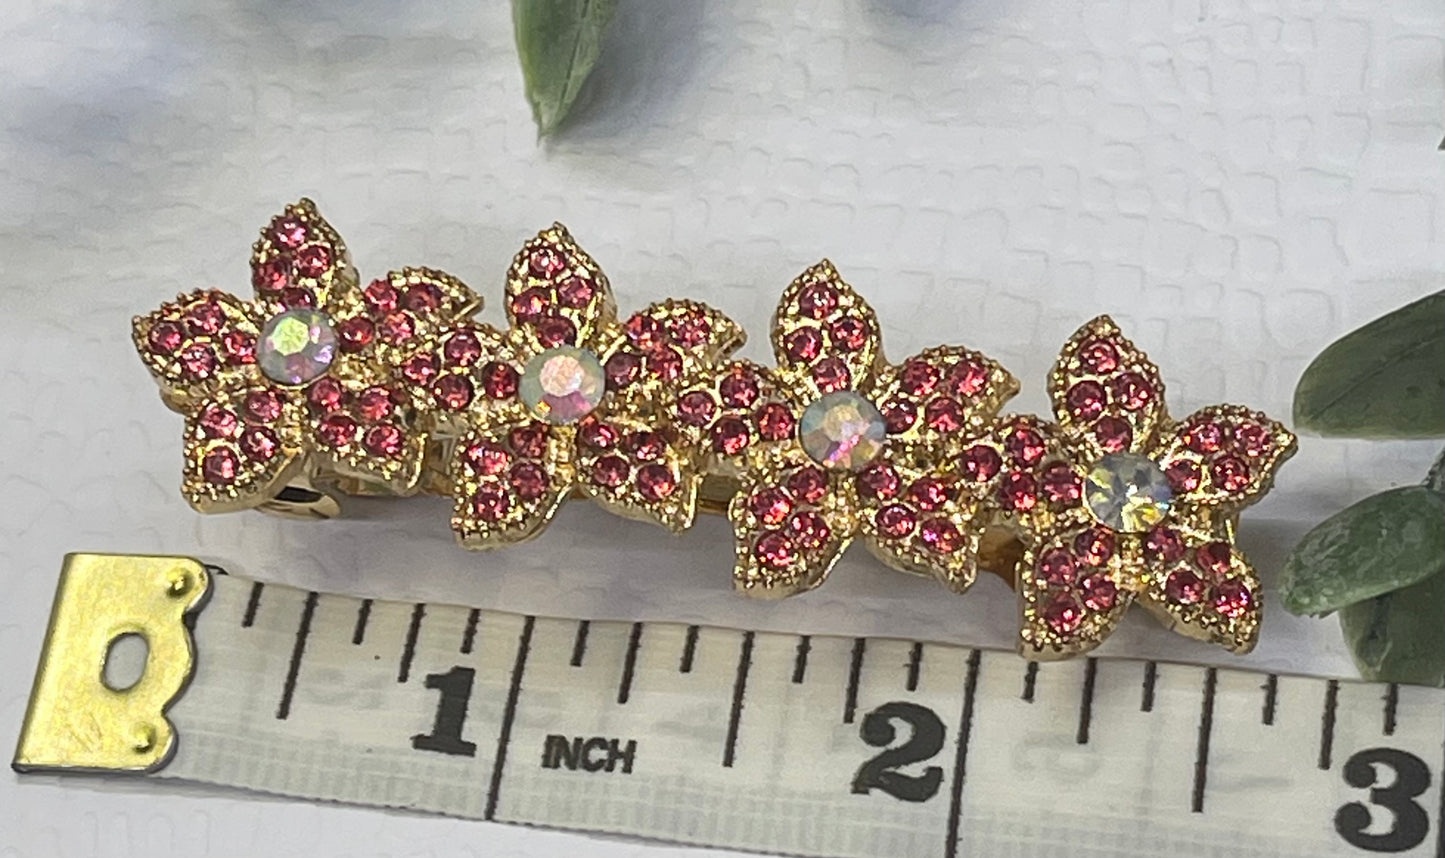 Pink Crystal rhinestone flower star barrette approximately 3.0” gold  tone formal hair accessories gift wedding bridesmaid